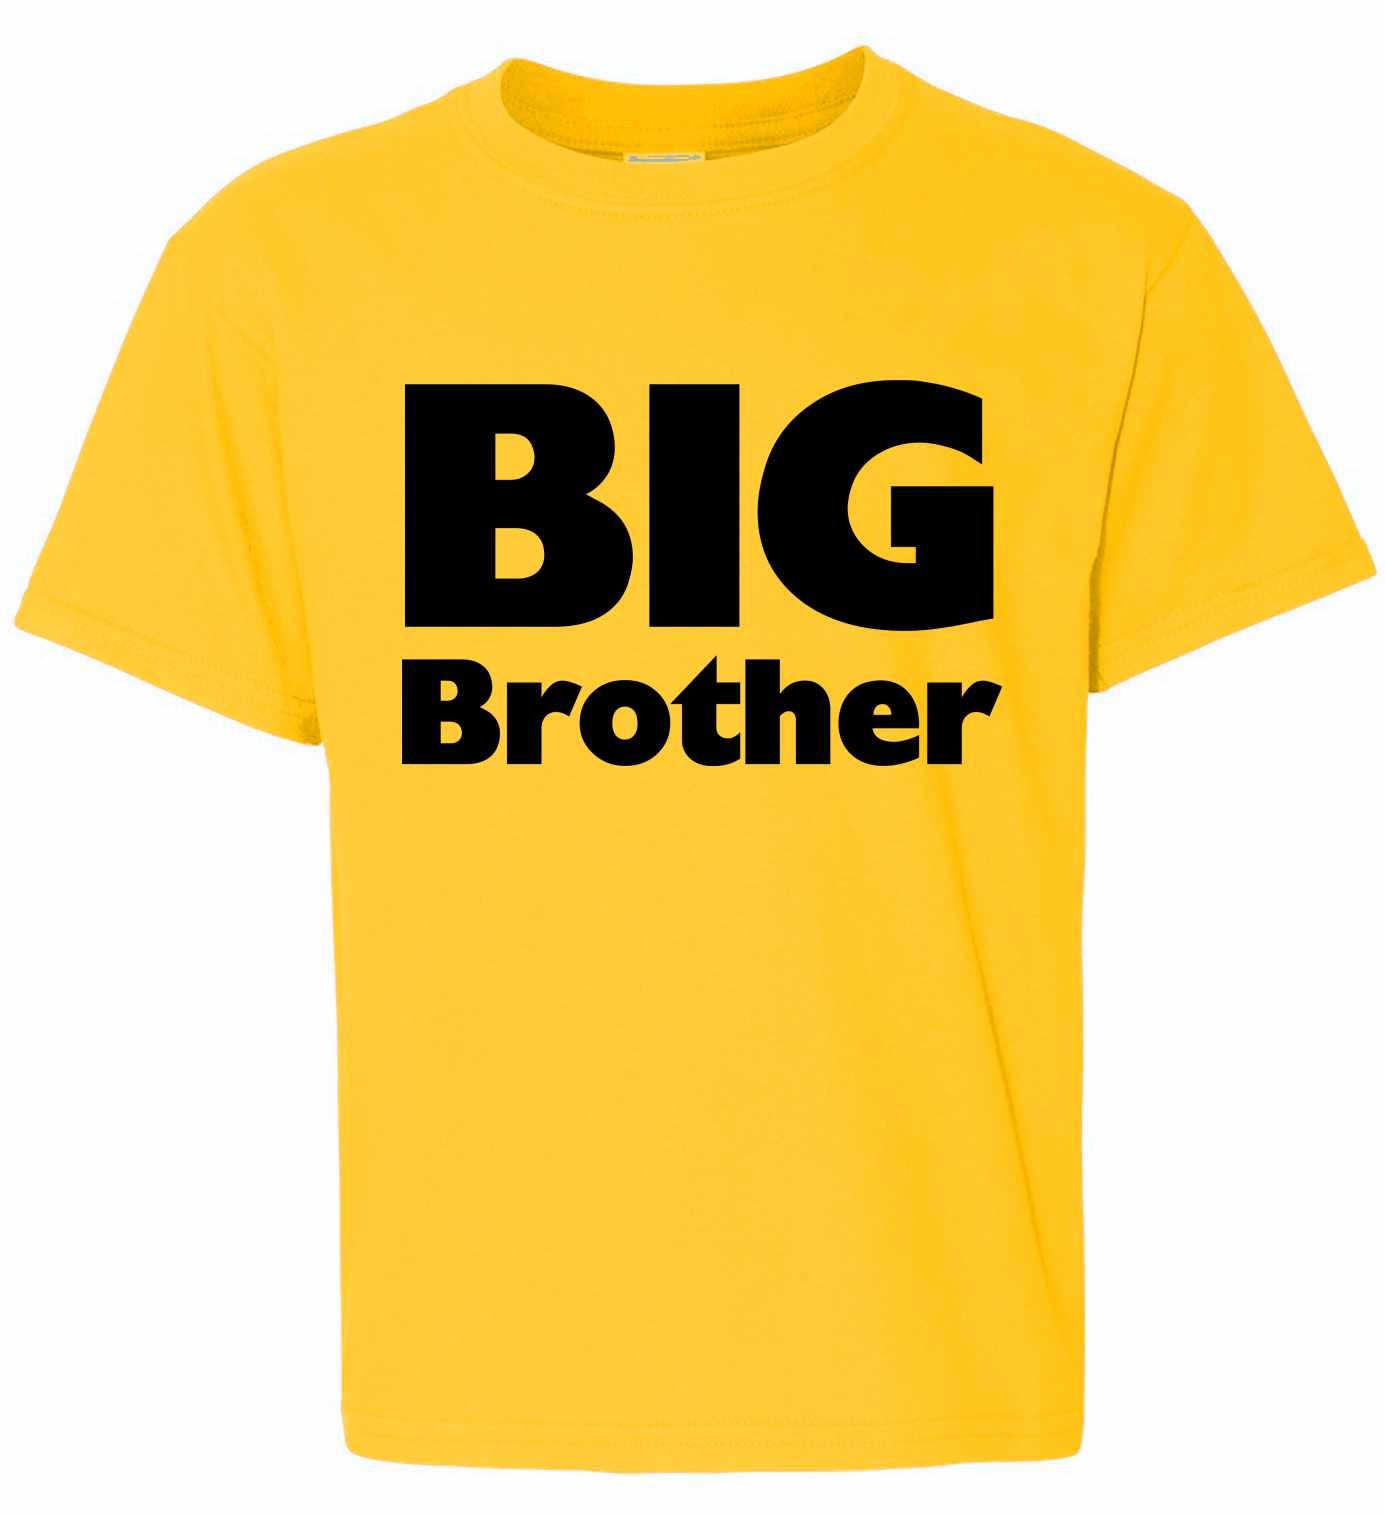 BIG BROTHER on Youth T-Shirt (#861-201)